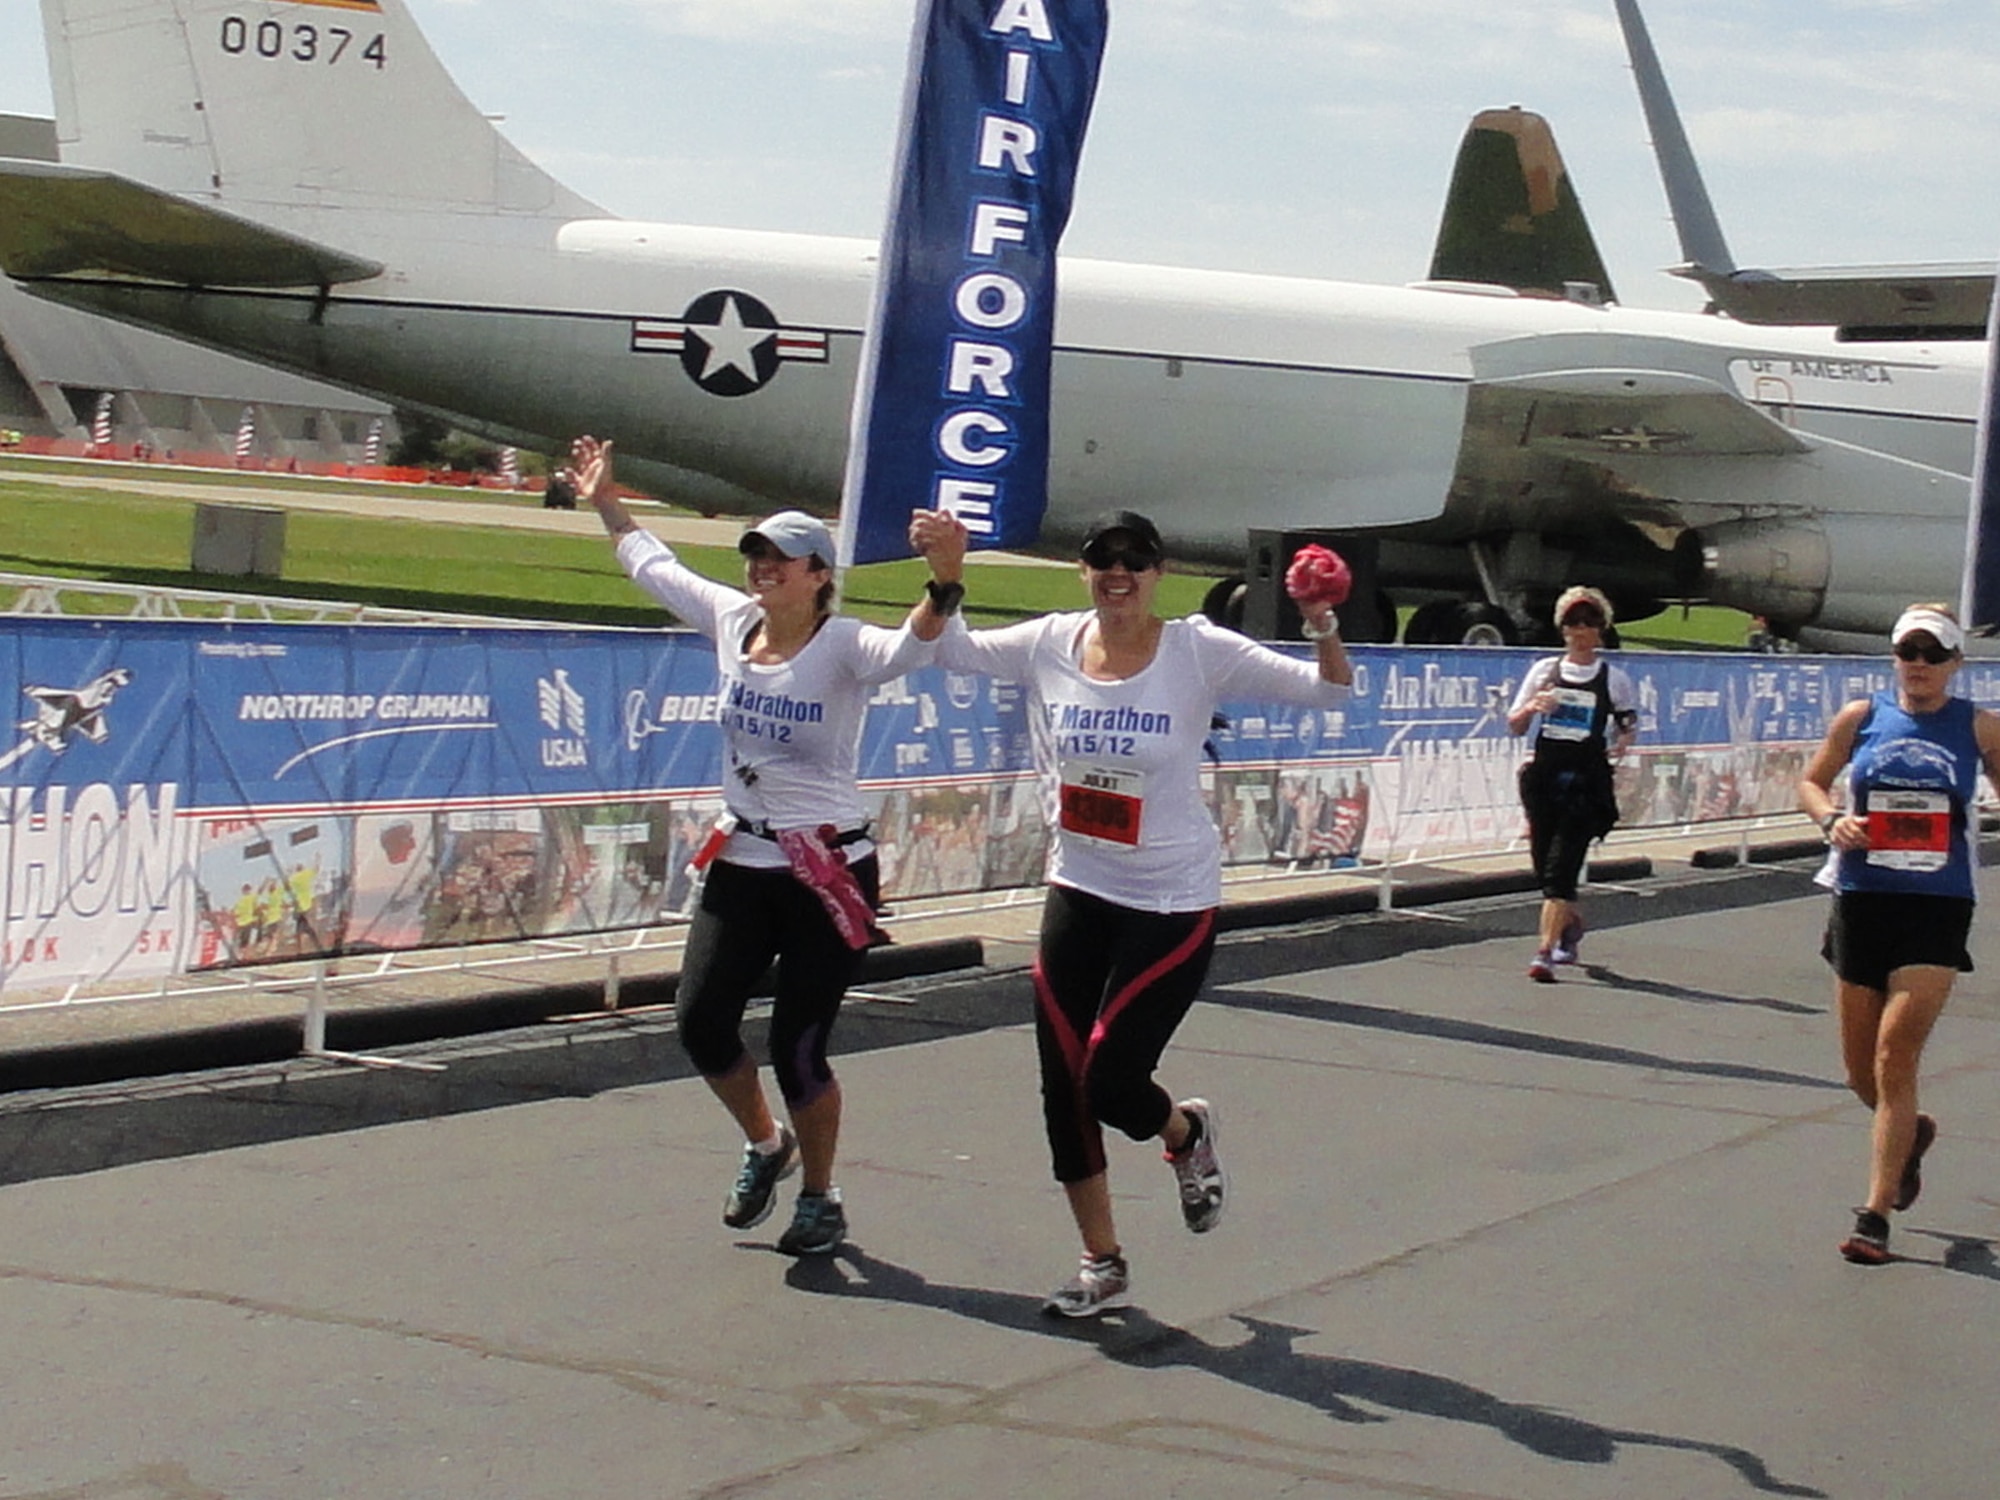 WRIGHT-PATTERSON AIR FORCE BASE, Ohio – From left to right; Master Sgt. Jacqueline Duarte, 548th Operations Support Squadron, Beale Air Force Base, Calif., and Juliet Valenzuela, an Air Force veteran now living in Florida, cross the finish line of the 2012 Air Force Marathon in  4 hours, 40 minutes Sept. 15. Both are the siblings of Tech. Sgt. Joseph Valenzuela, 445th Aeromedical Evacuation Squadron, who crossed the finish line in 4:15. (Courtesy photo)


